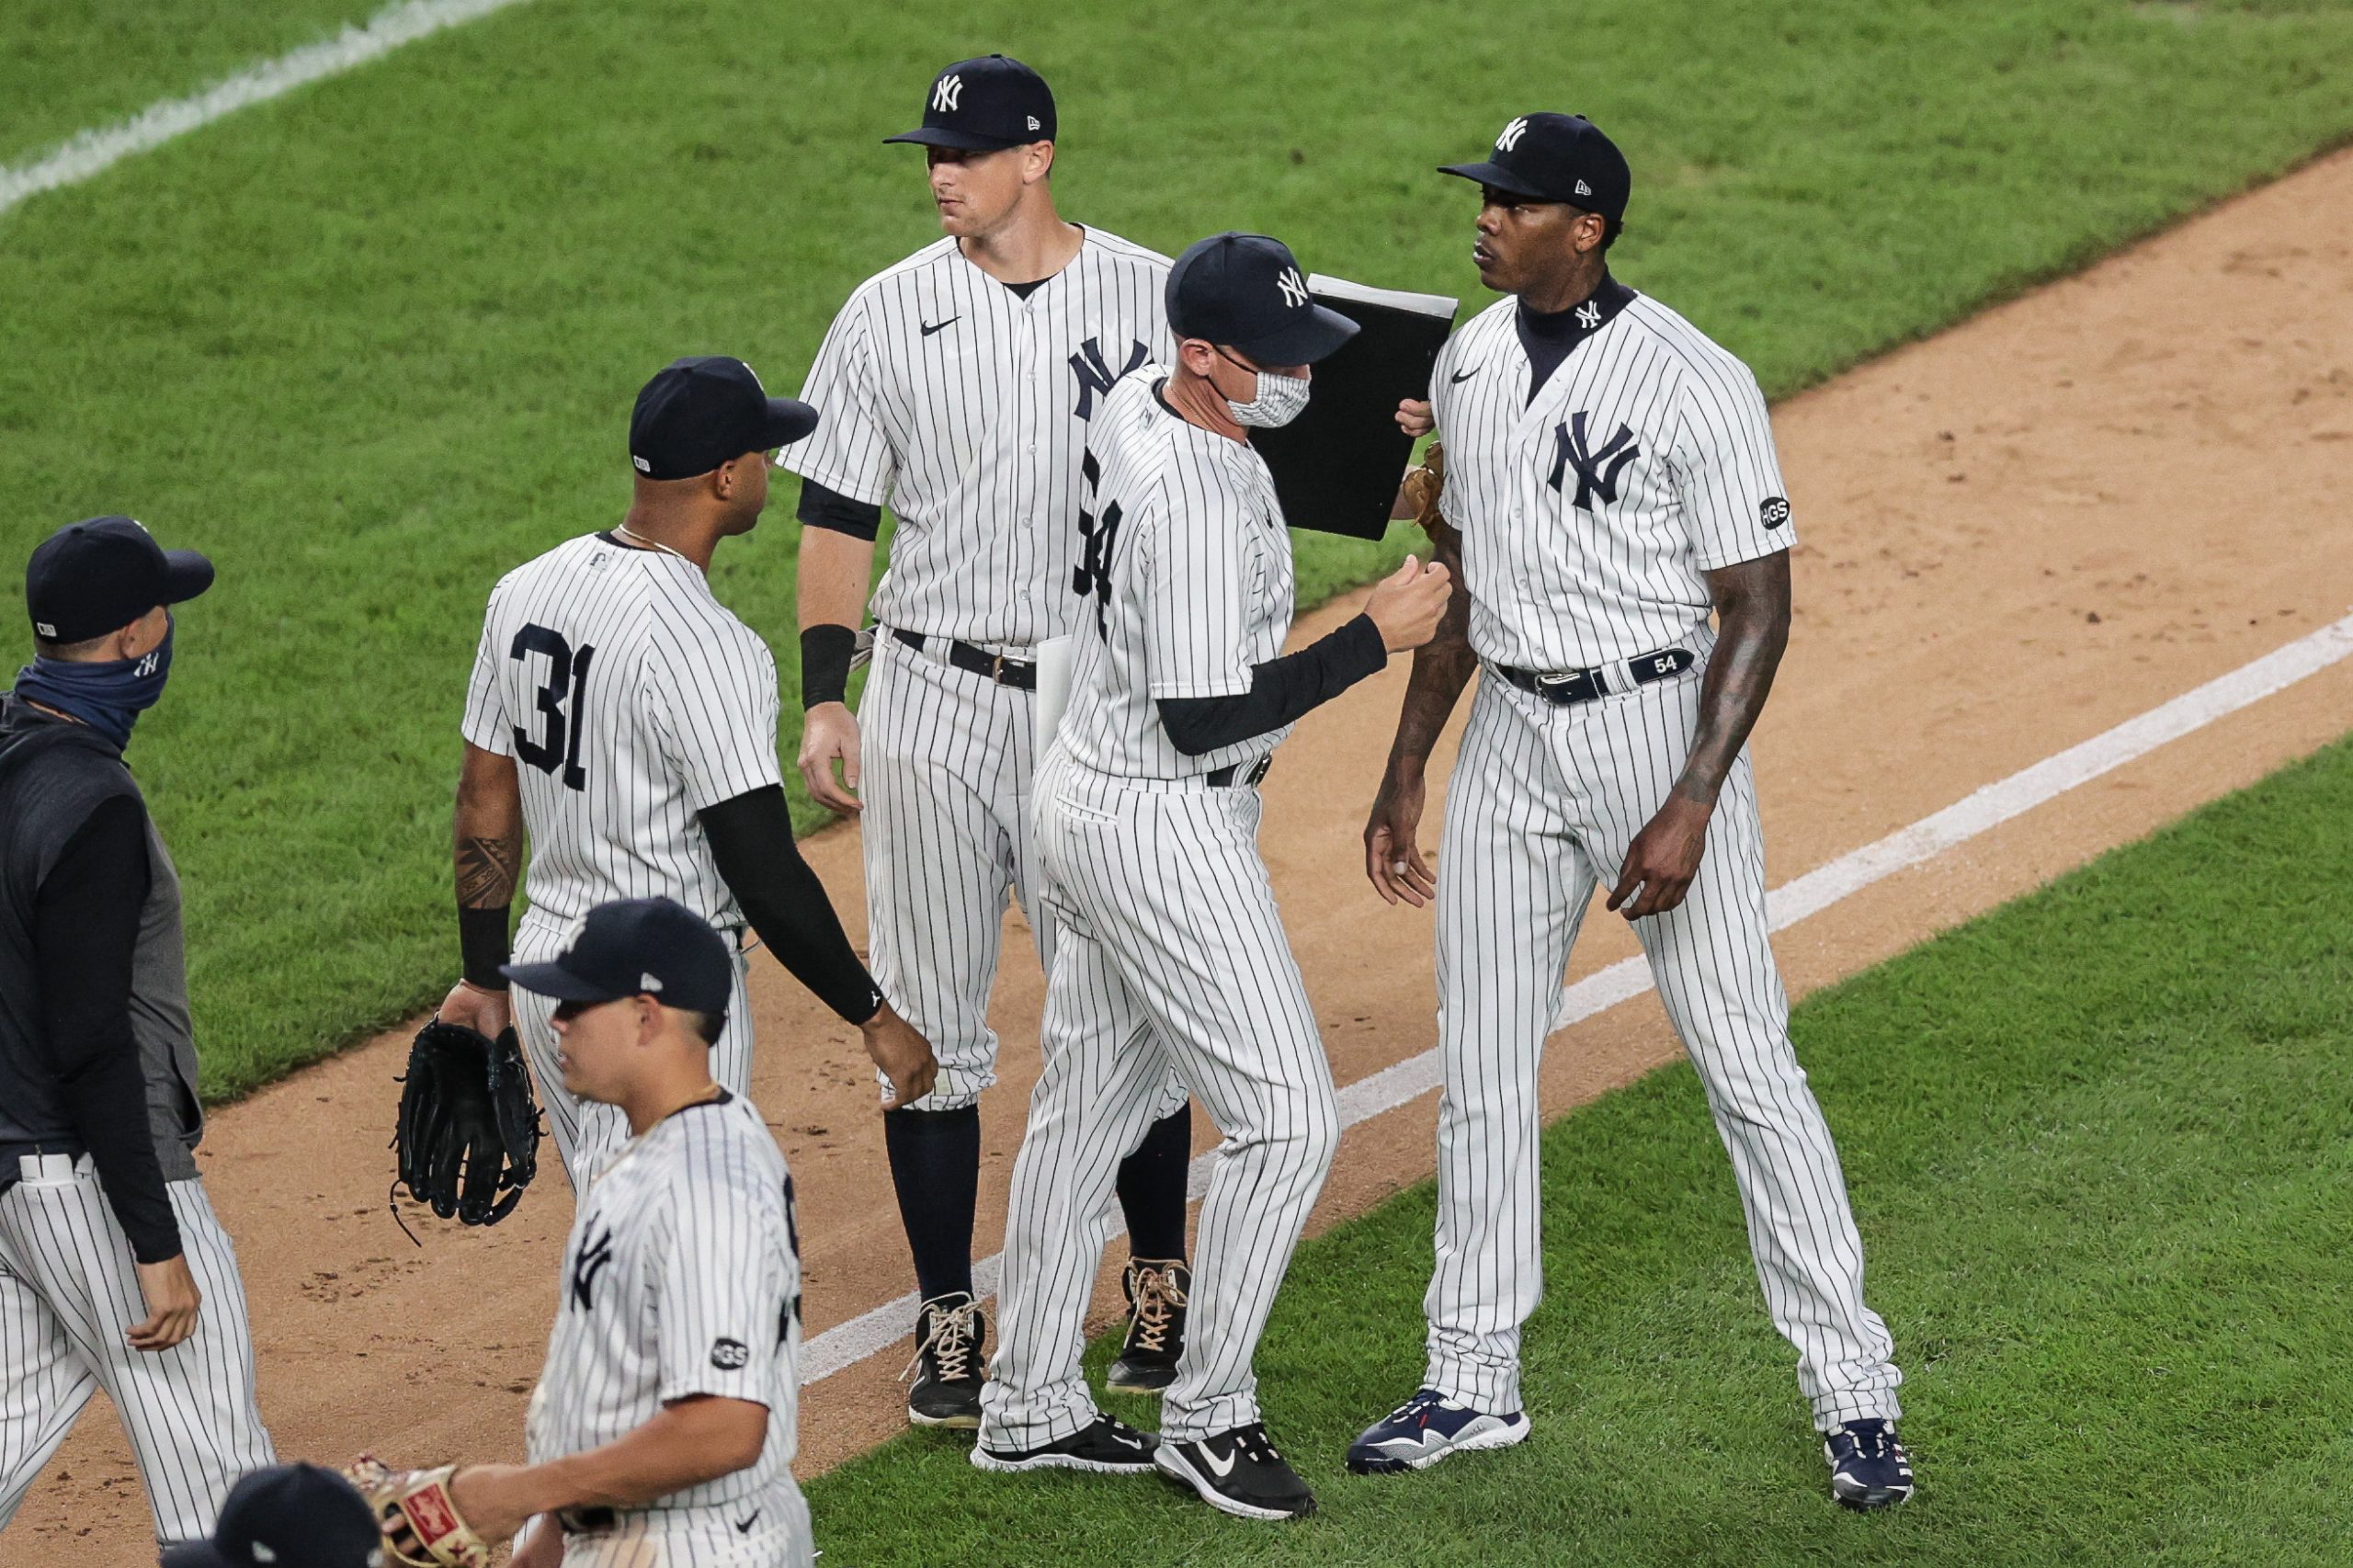 All-Star Game 2018: Aaron Judge breaks slight Yankees drought with